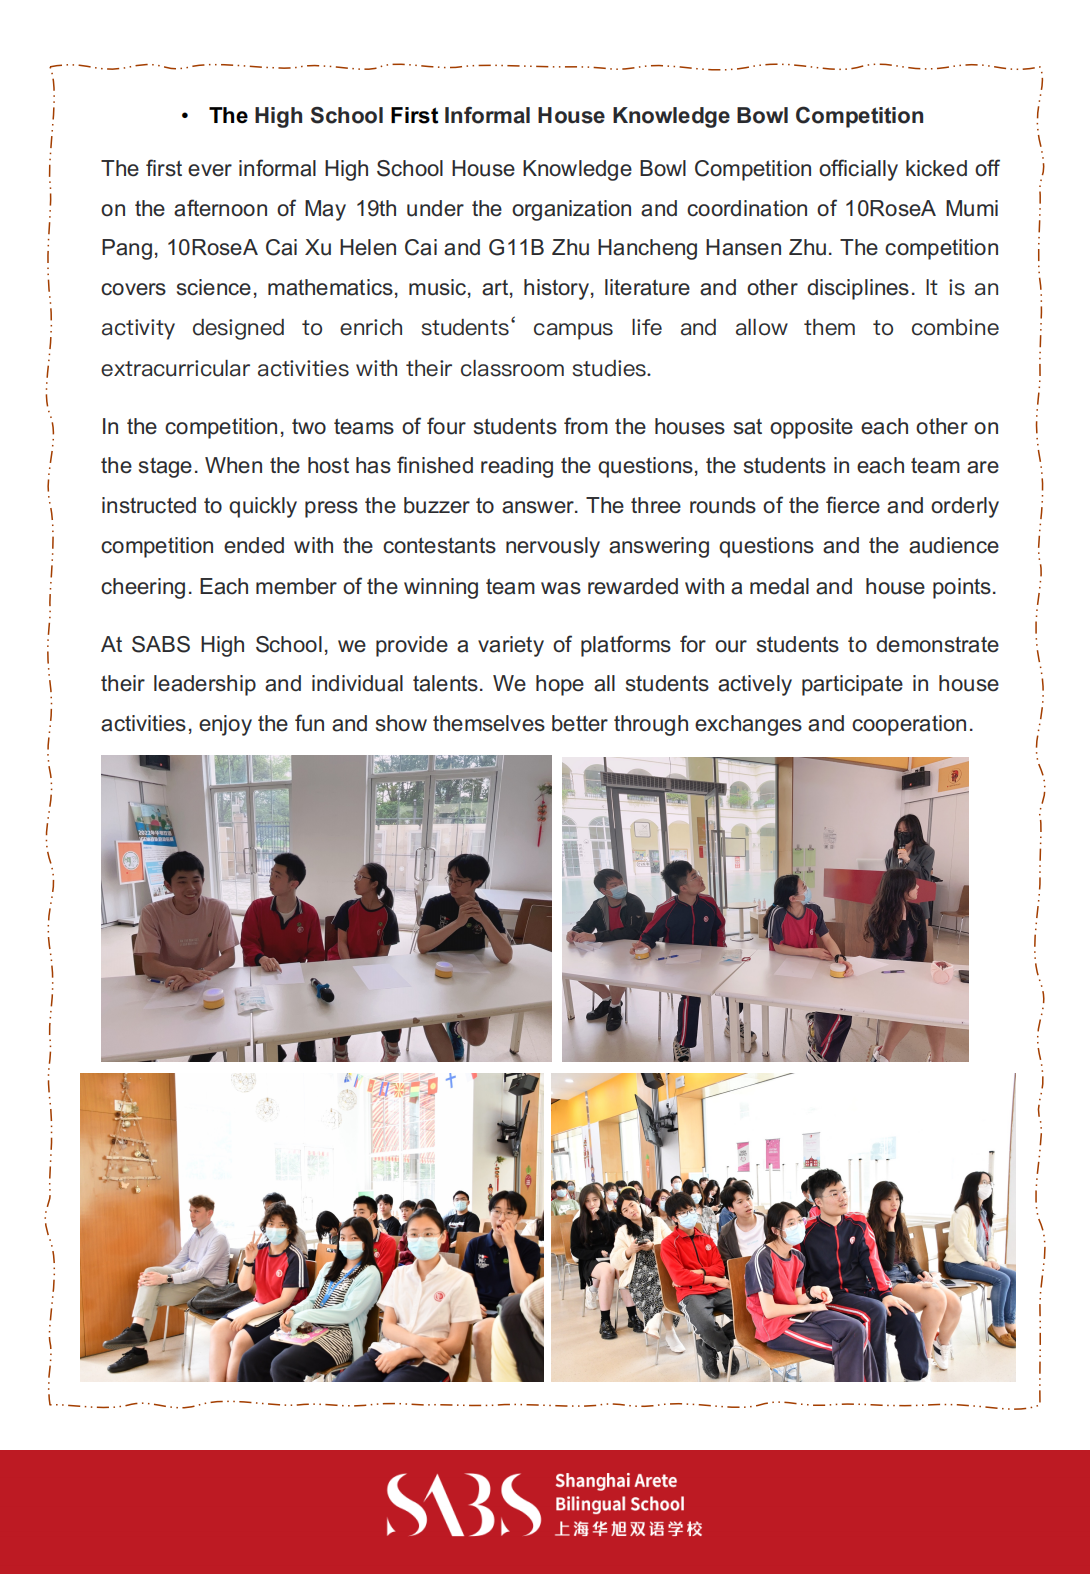 HS 7th Issue Newsletter pptx（English)_03.png